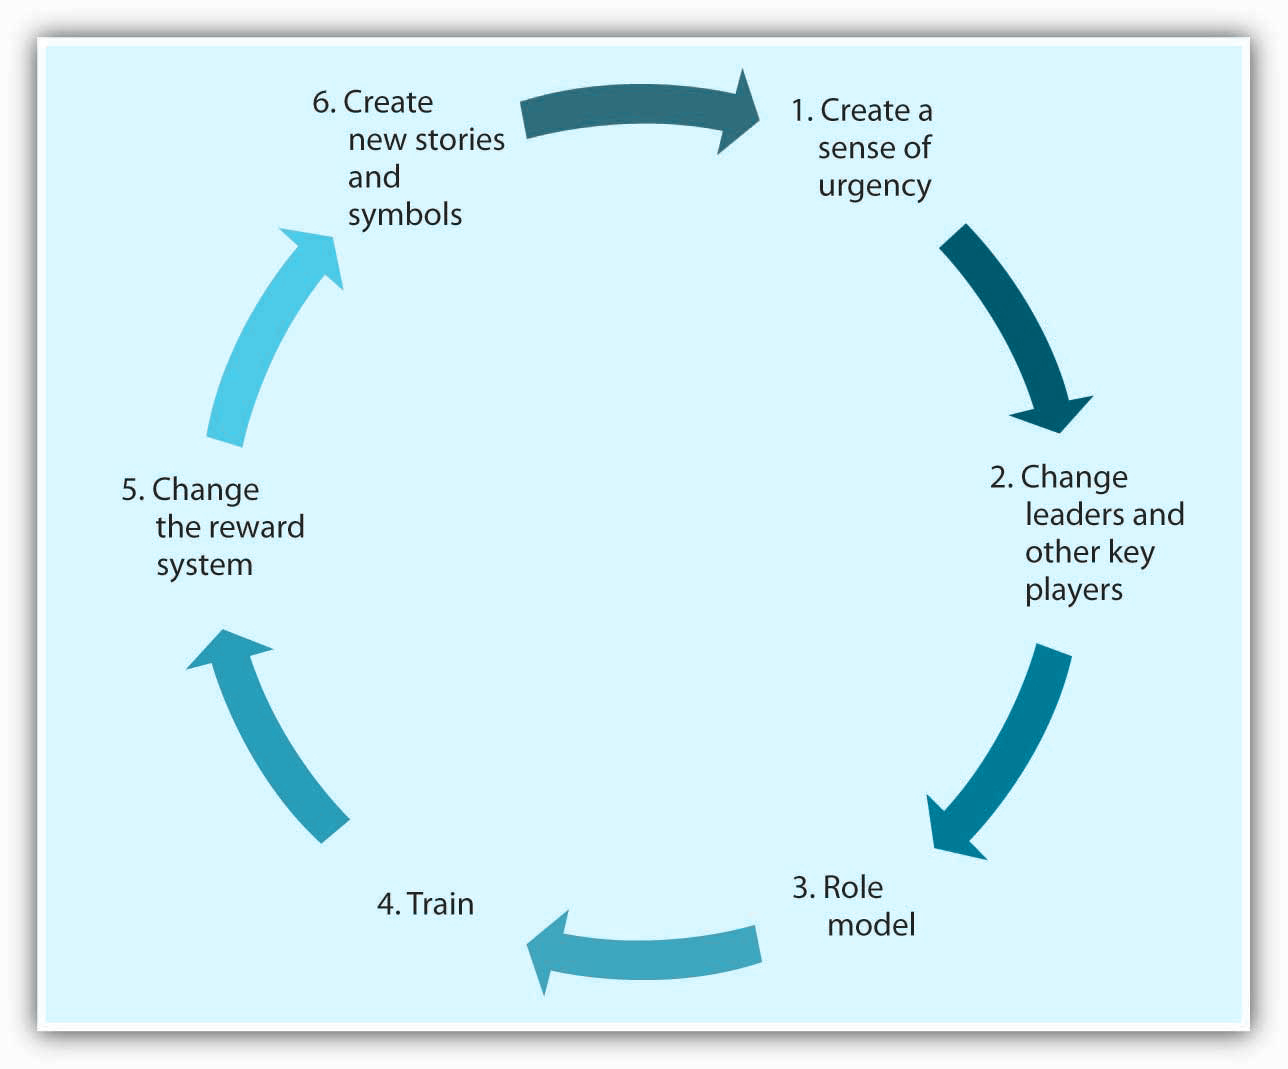 Illustration of the cycle for culture change